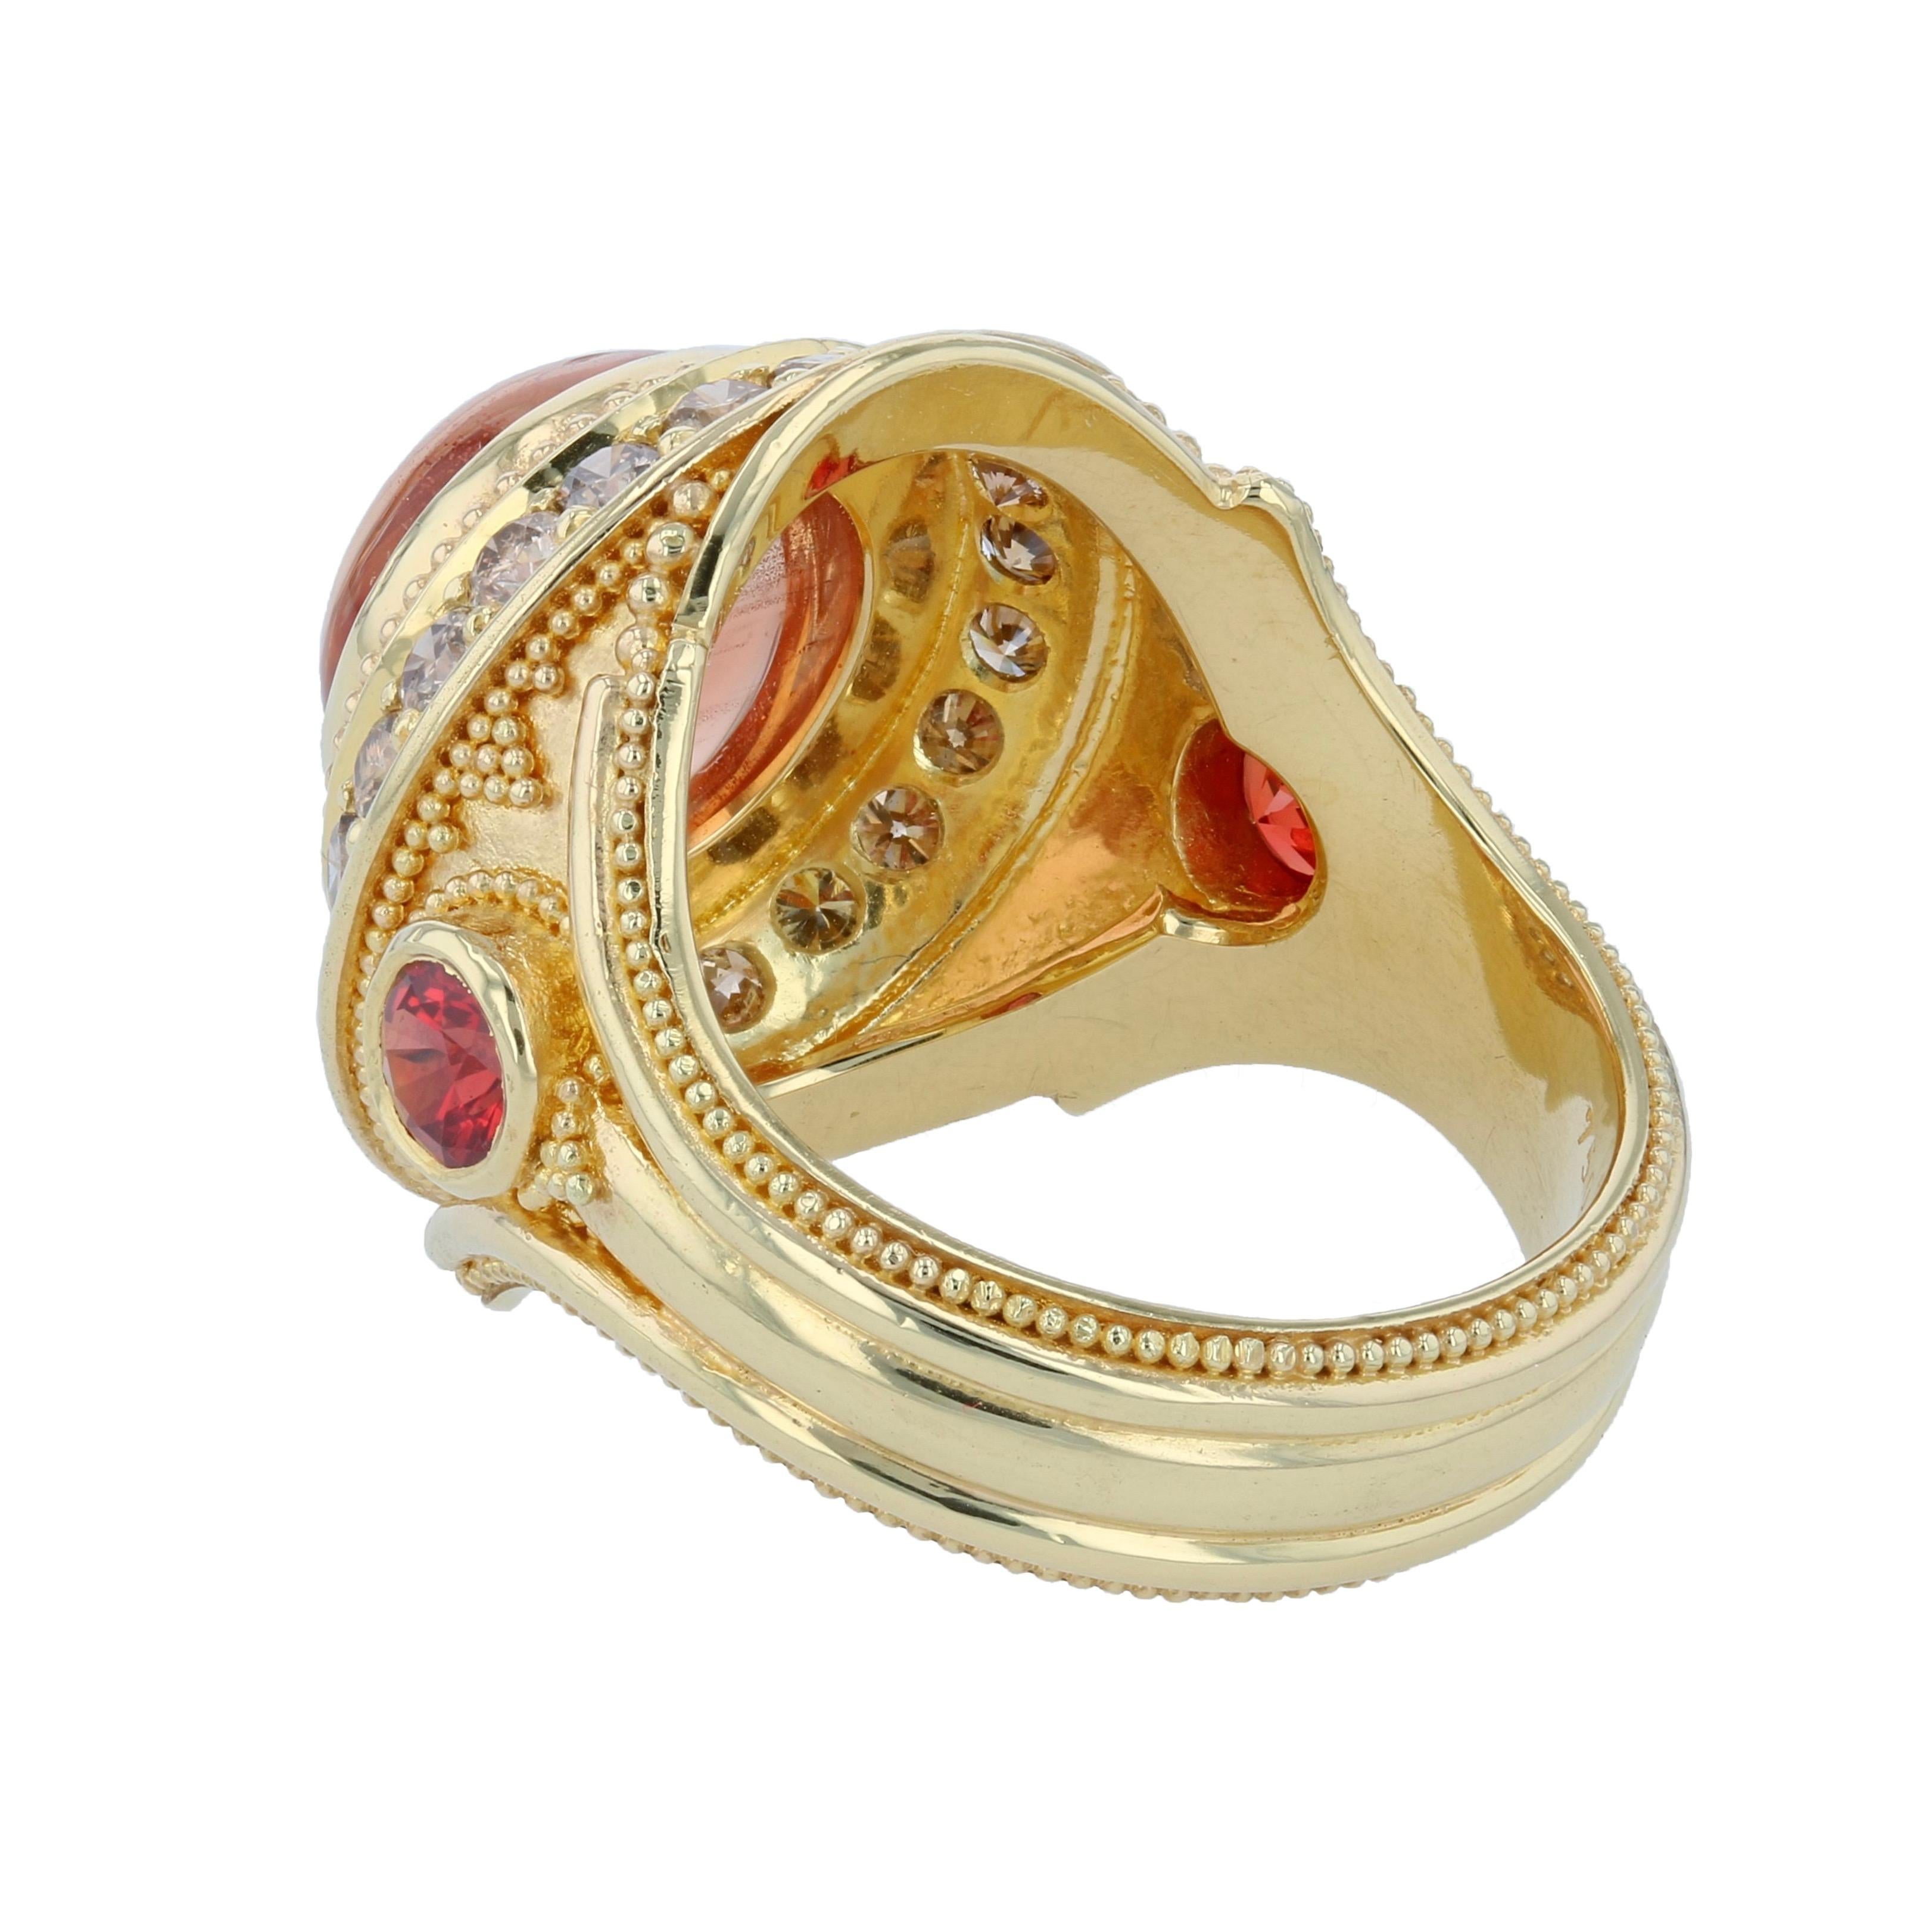 Experience the magic of Kent Raible's Bespoke Sunstone and brown - Cognac Diamond cocktail ring. The adularescence, or schiller, in this natural Oregon Sunstone adds a pleasing allure. The Cognac diamonds surround it lending an elegant sparkle, and